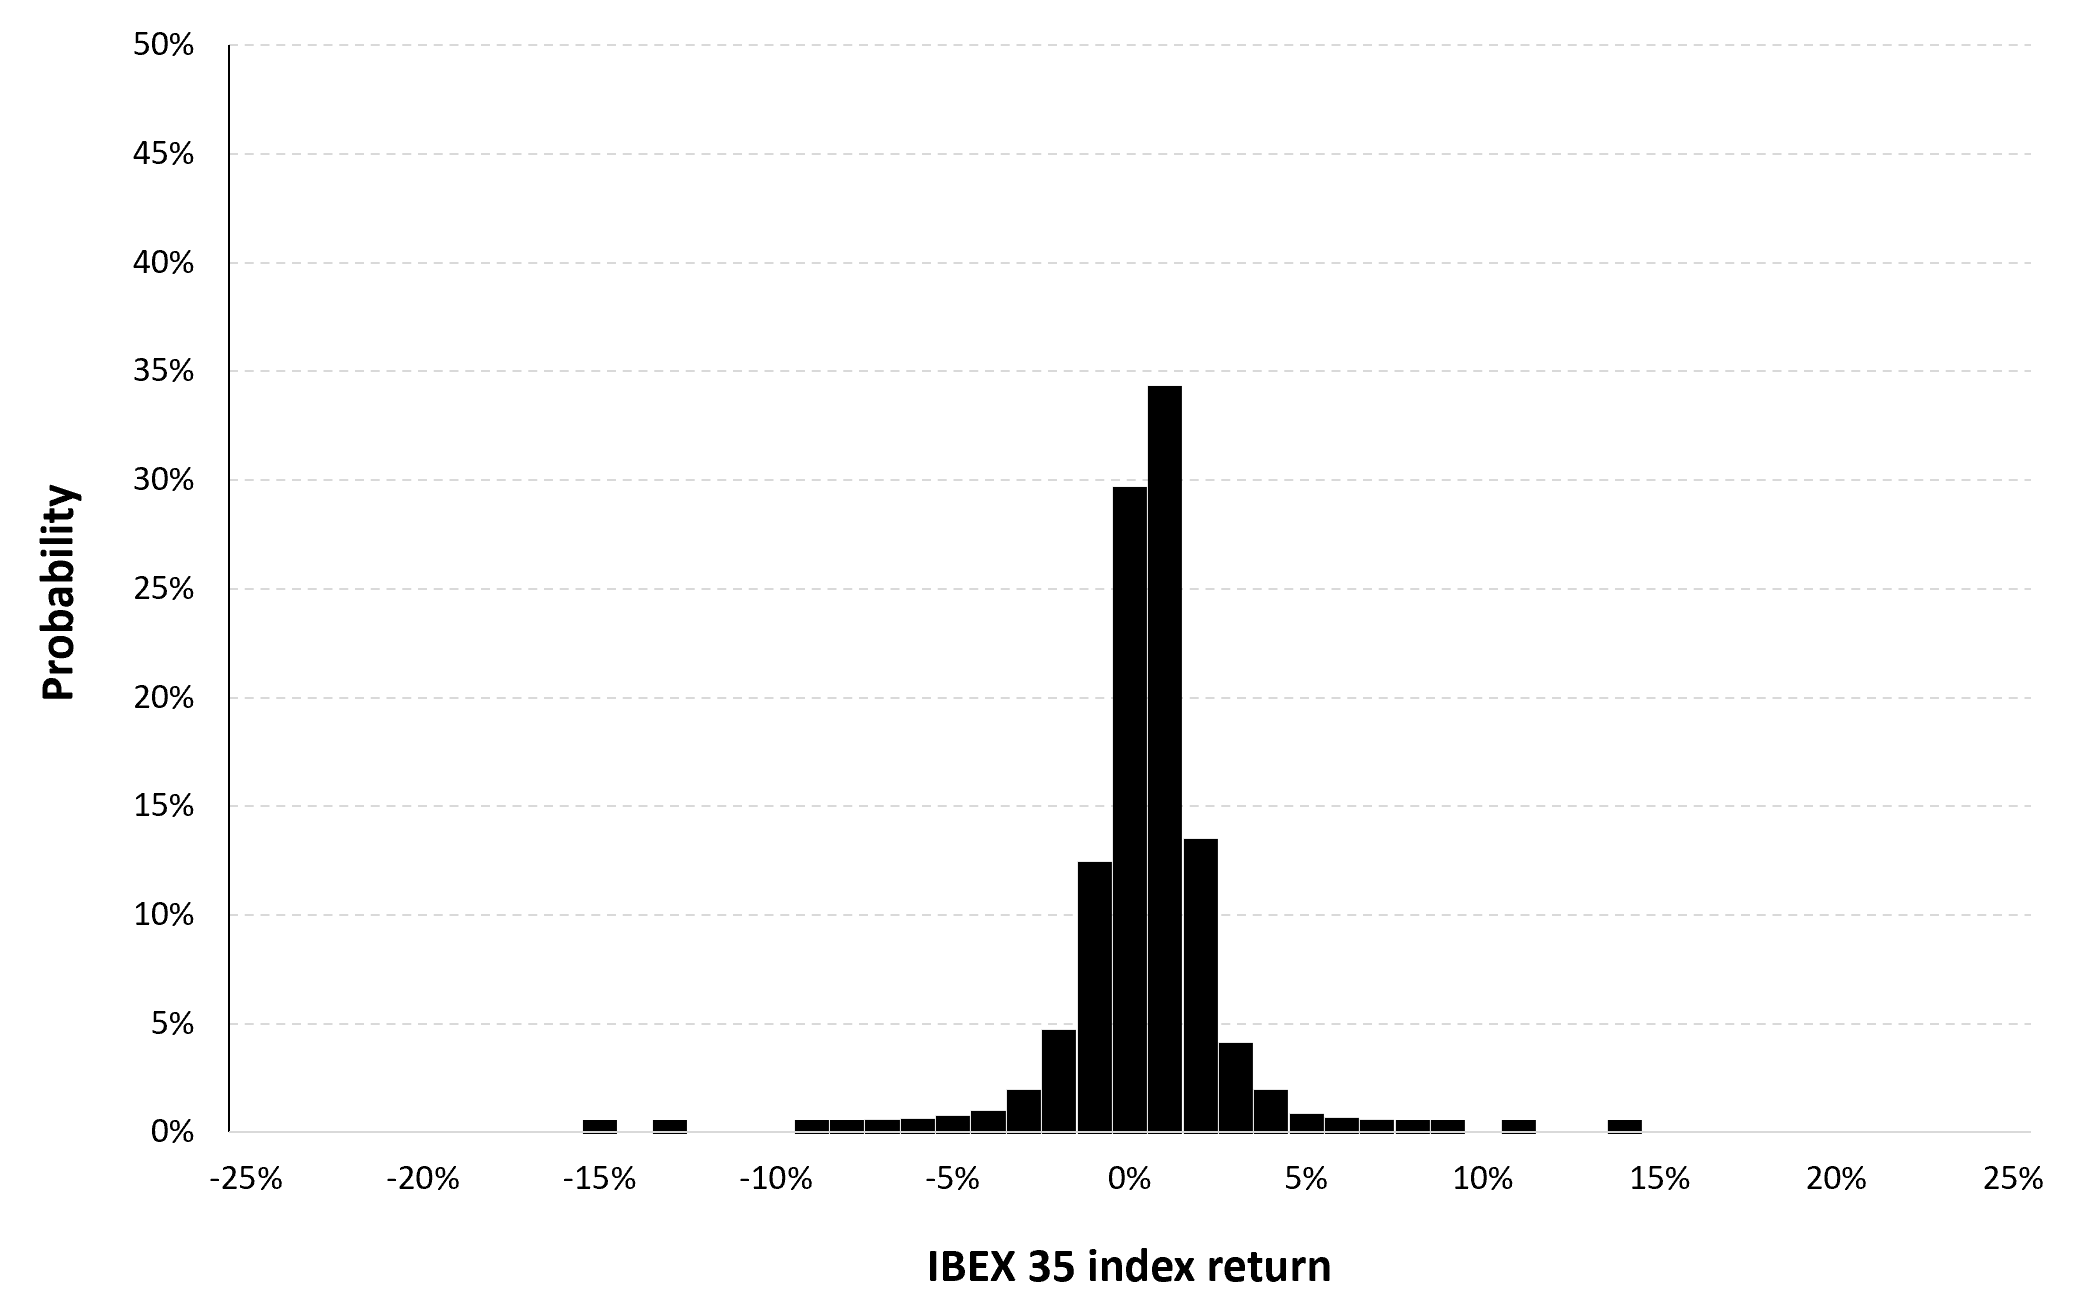 Historical distribution of the daily IBEX 35 index returns